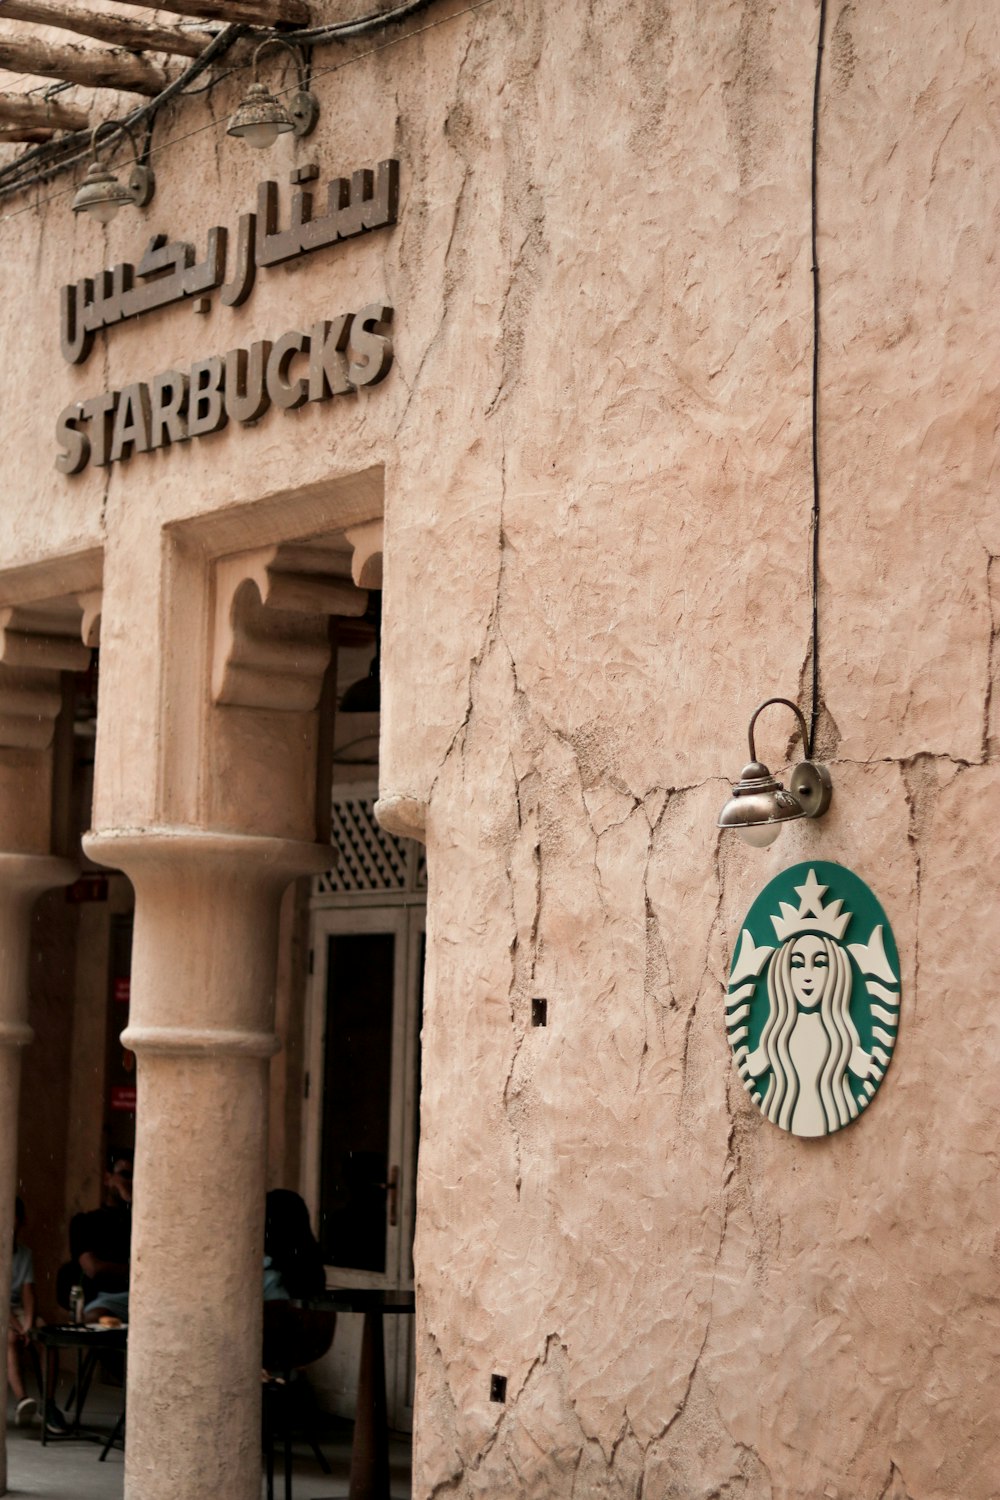 a starbucks sign on the side of a building